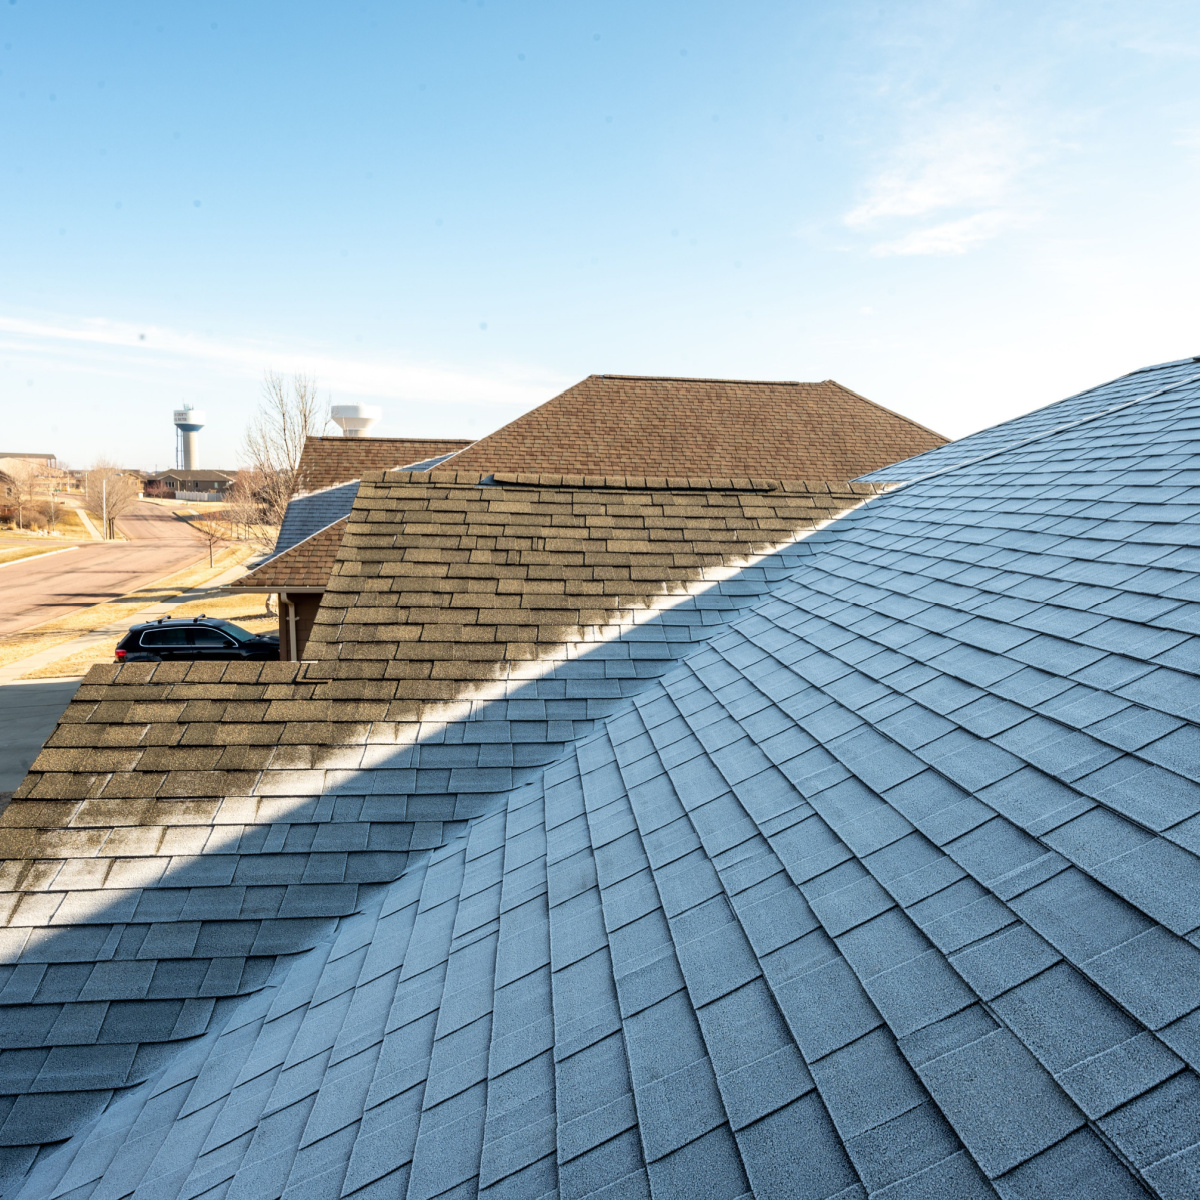 Winter weather can cause Katy roof damage that needs to be addressed by Houston roof experts.